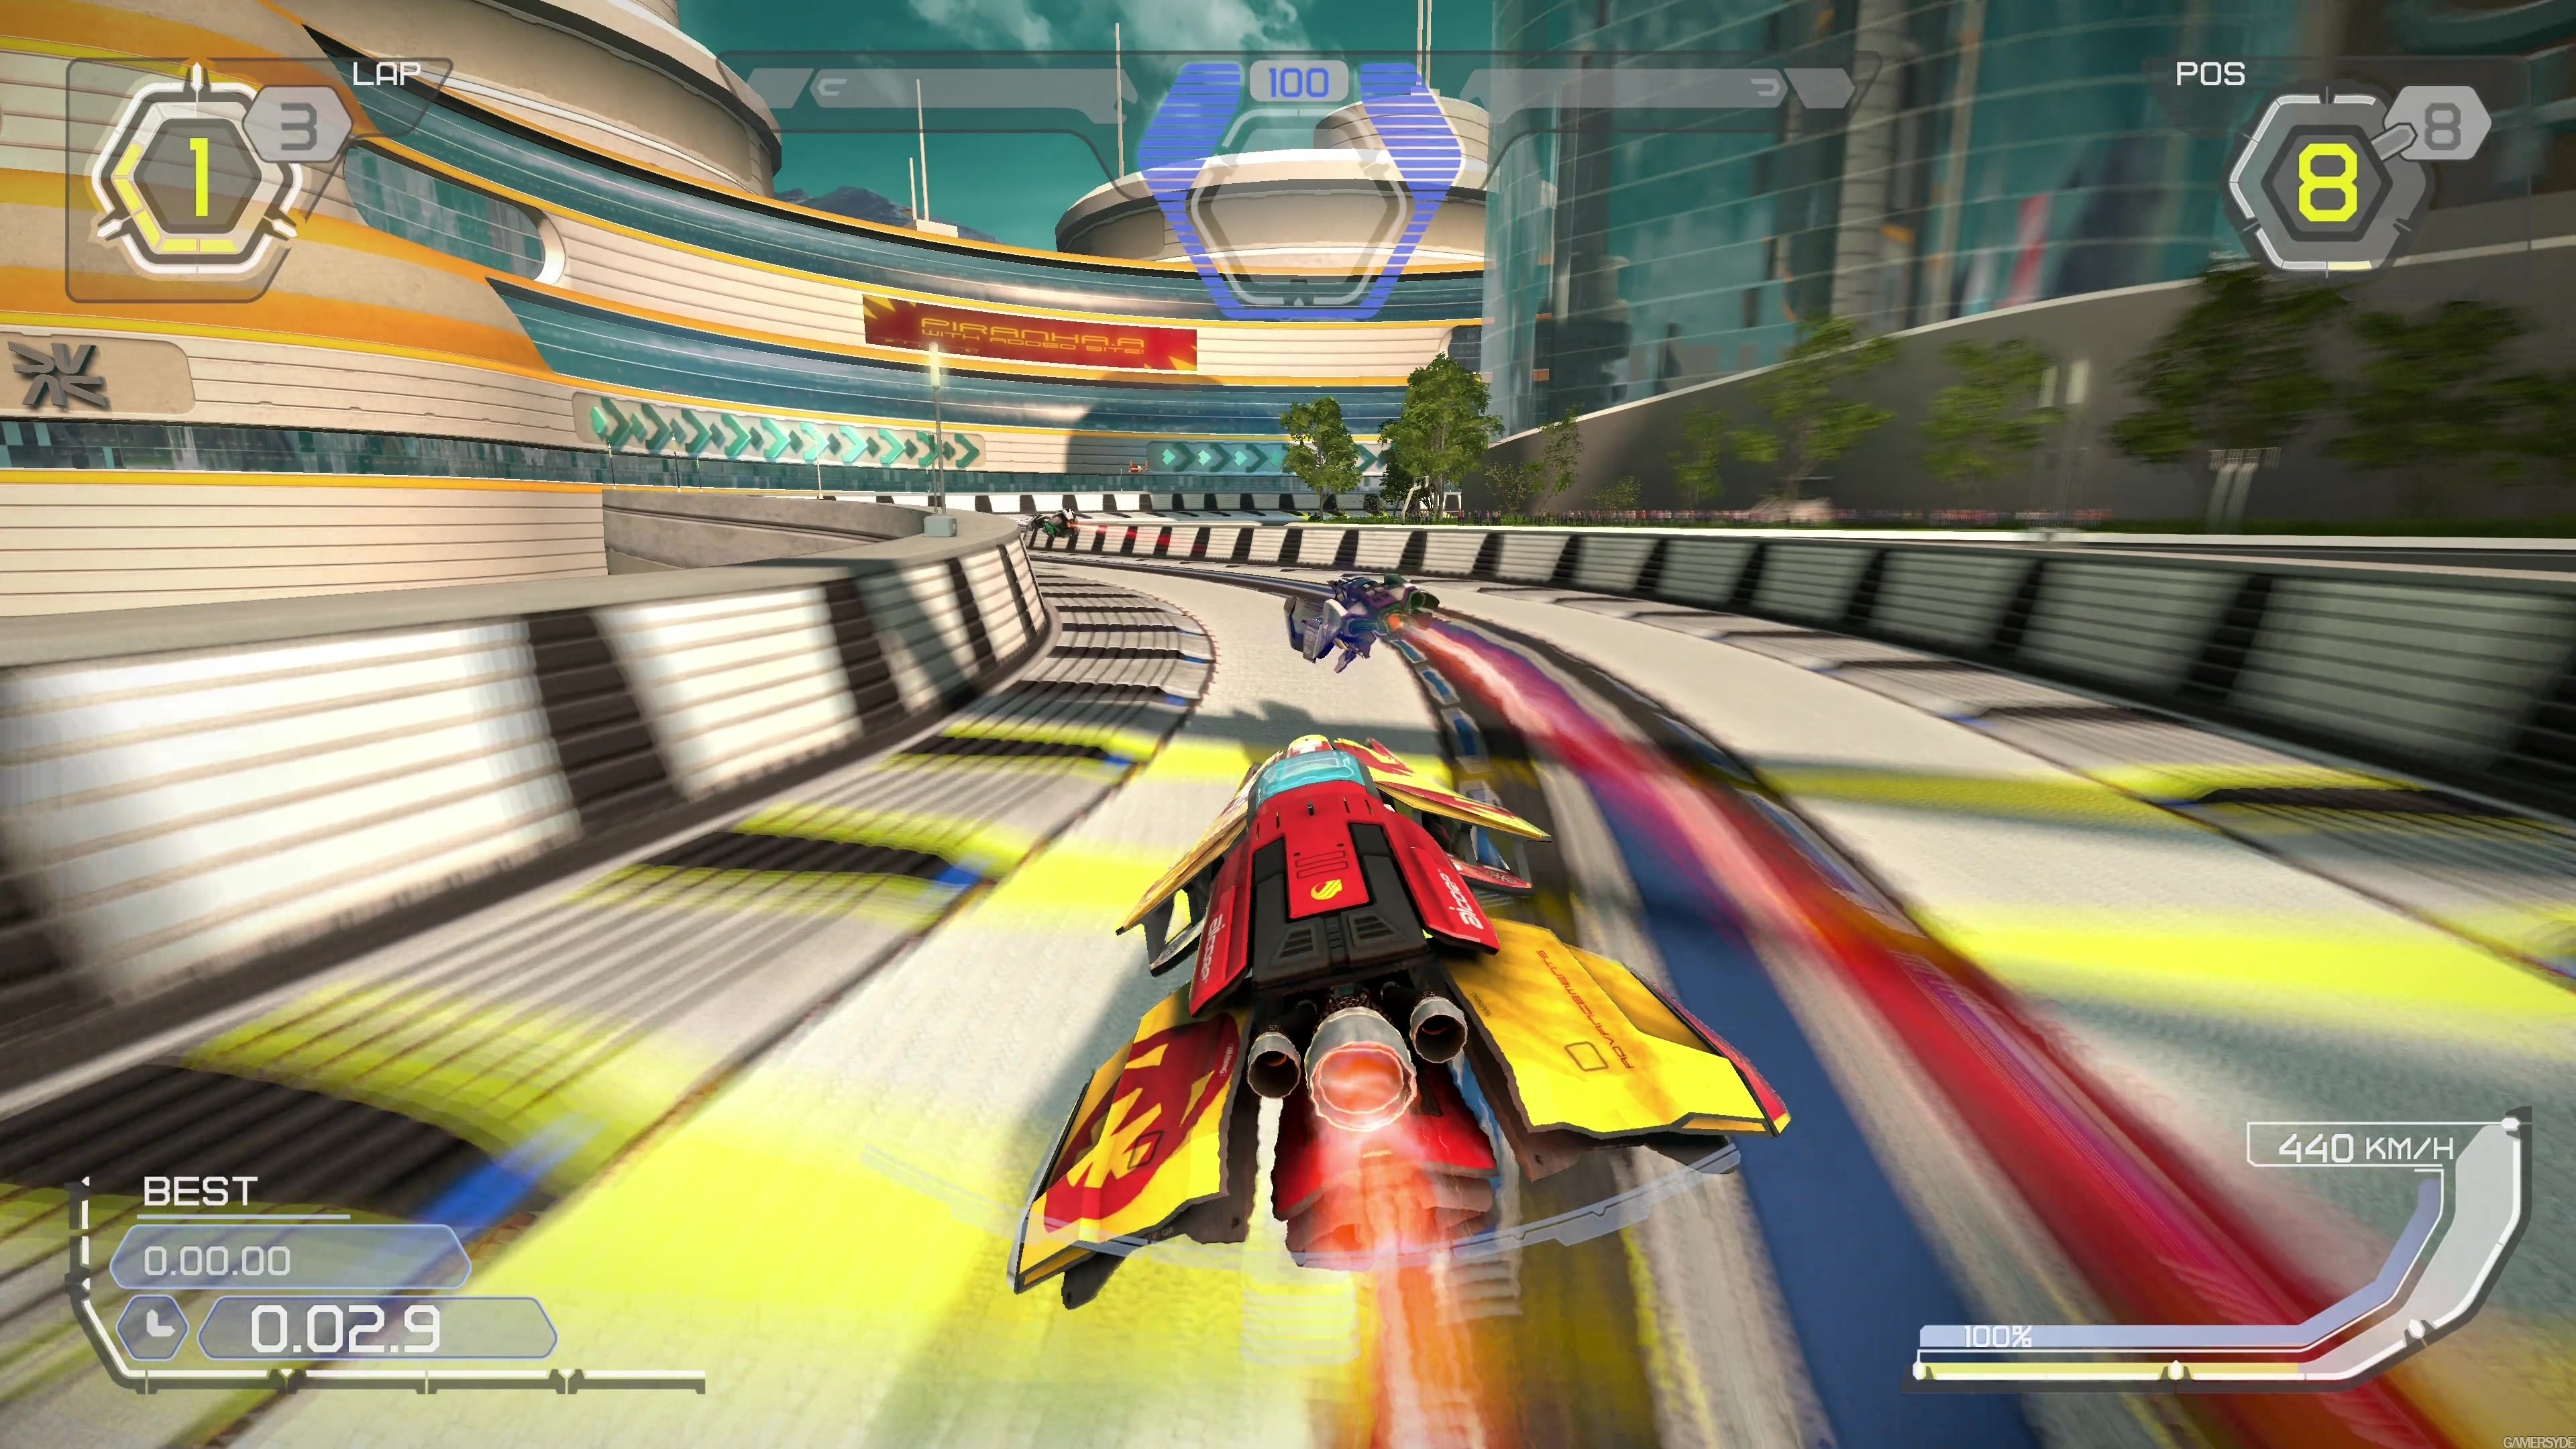 WipEout Omega Collection Wipeout HD - Gameplay #2 (4K) High quality stream and download - Gamersyde